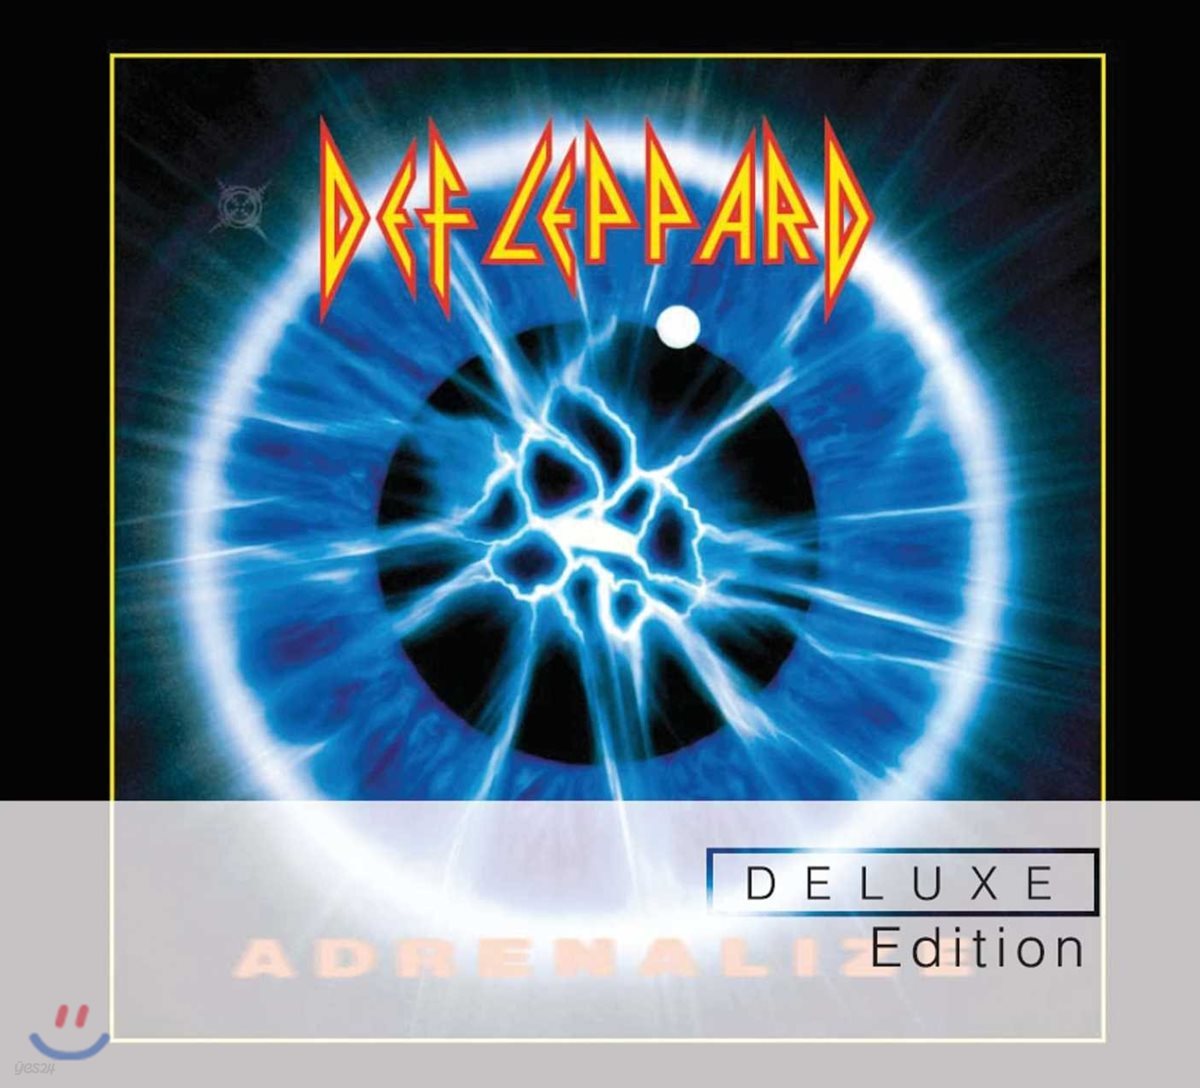 Def Leppard - Adrenalize [Deluxe Edition]